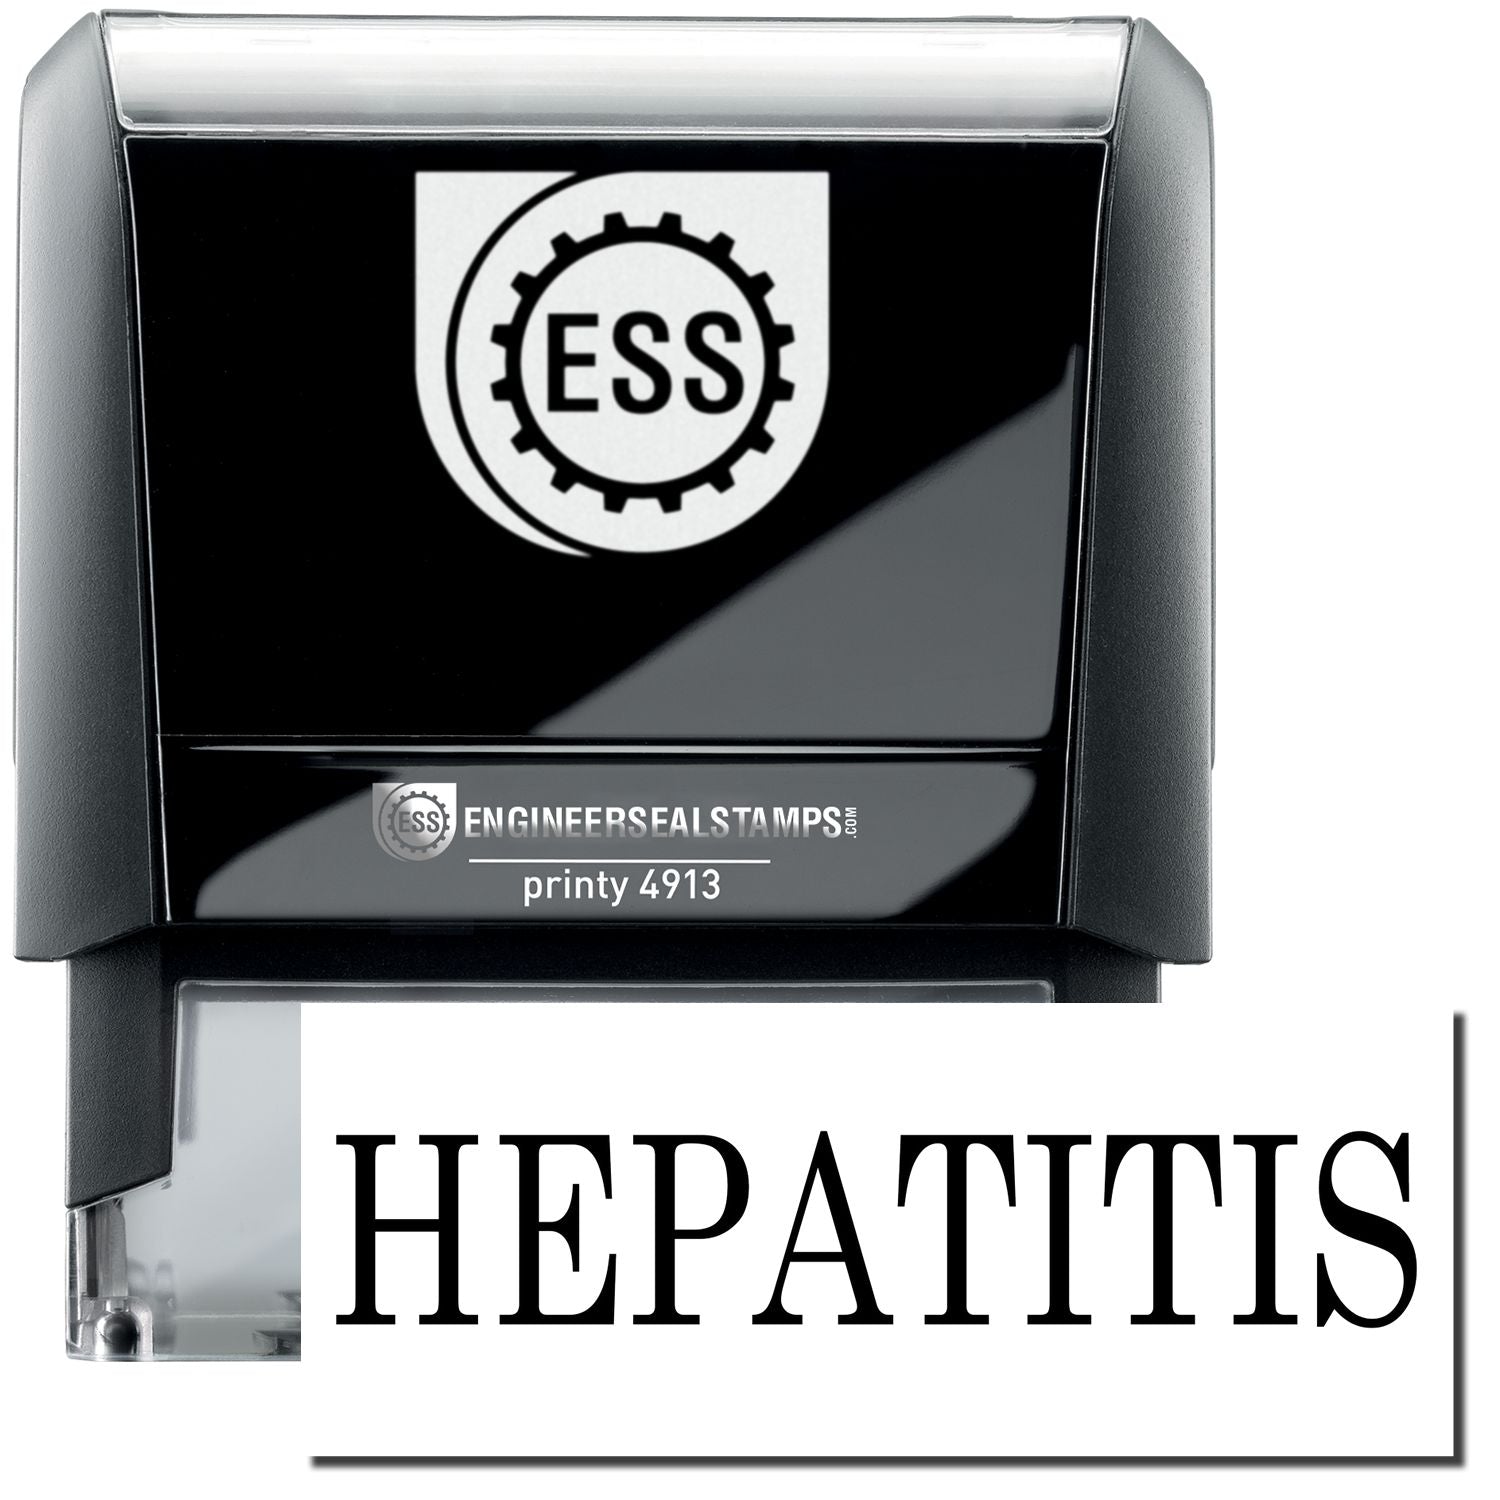 A self-inking stamp with a stamped image showing how the text "HEPATITIS" in a large bold font is displayed by it.